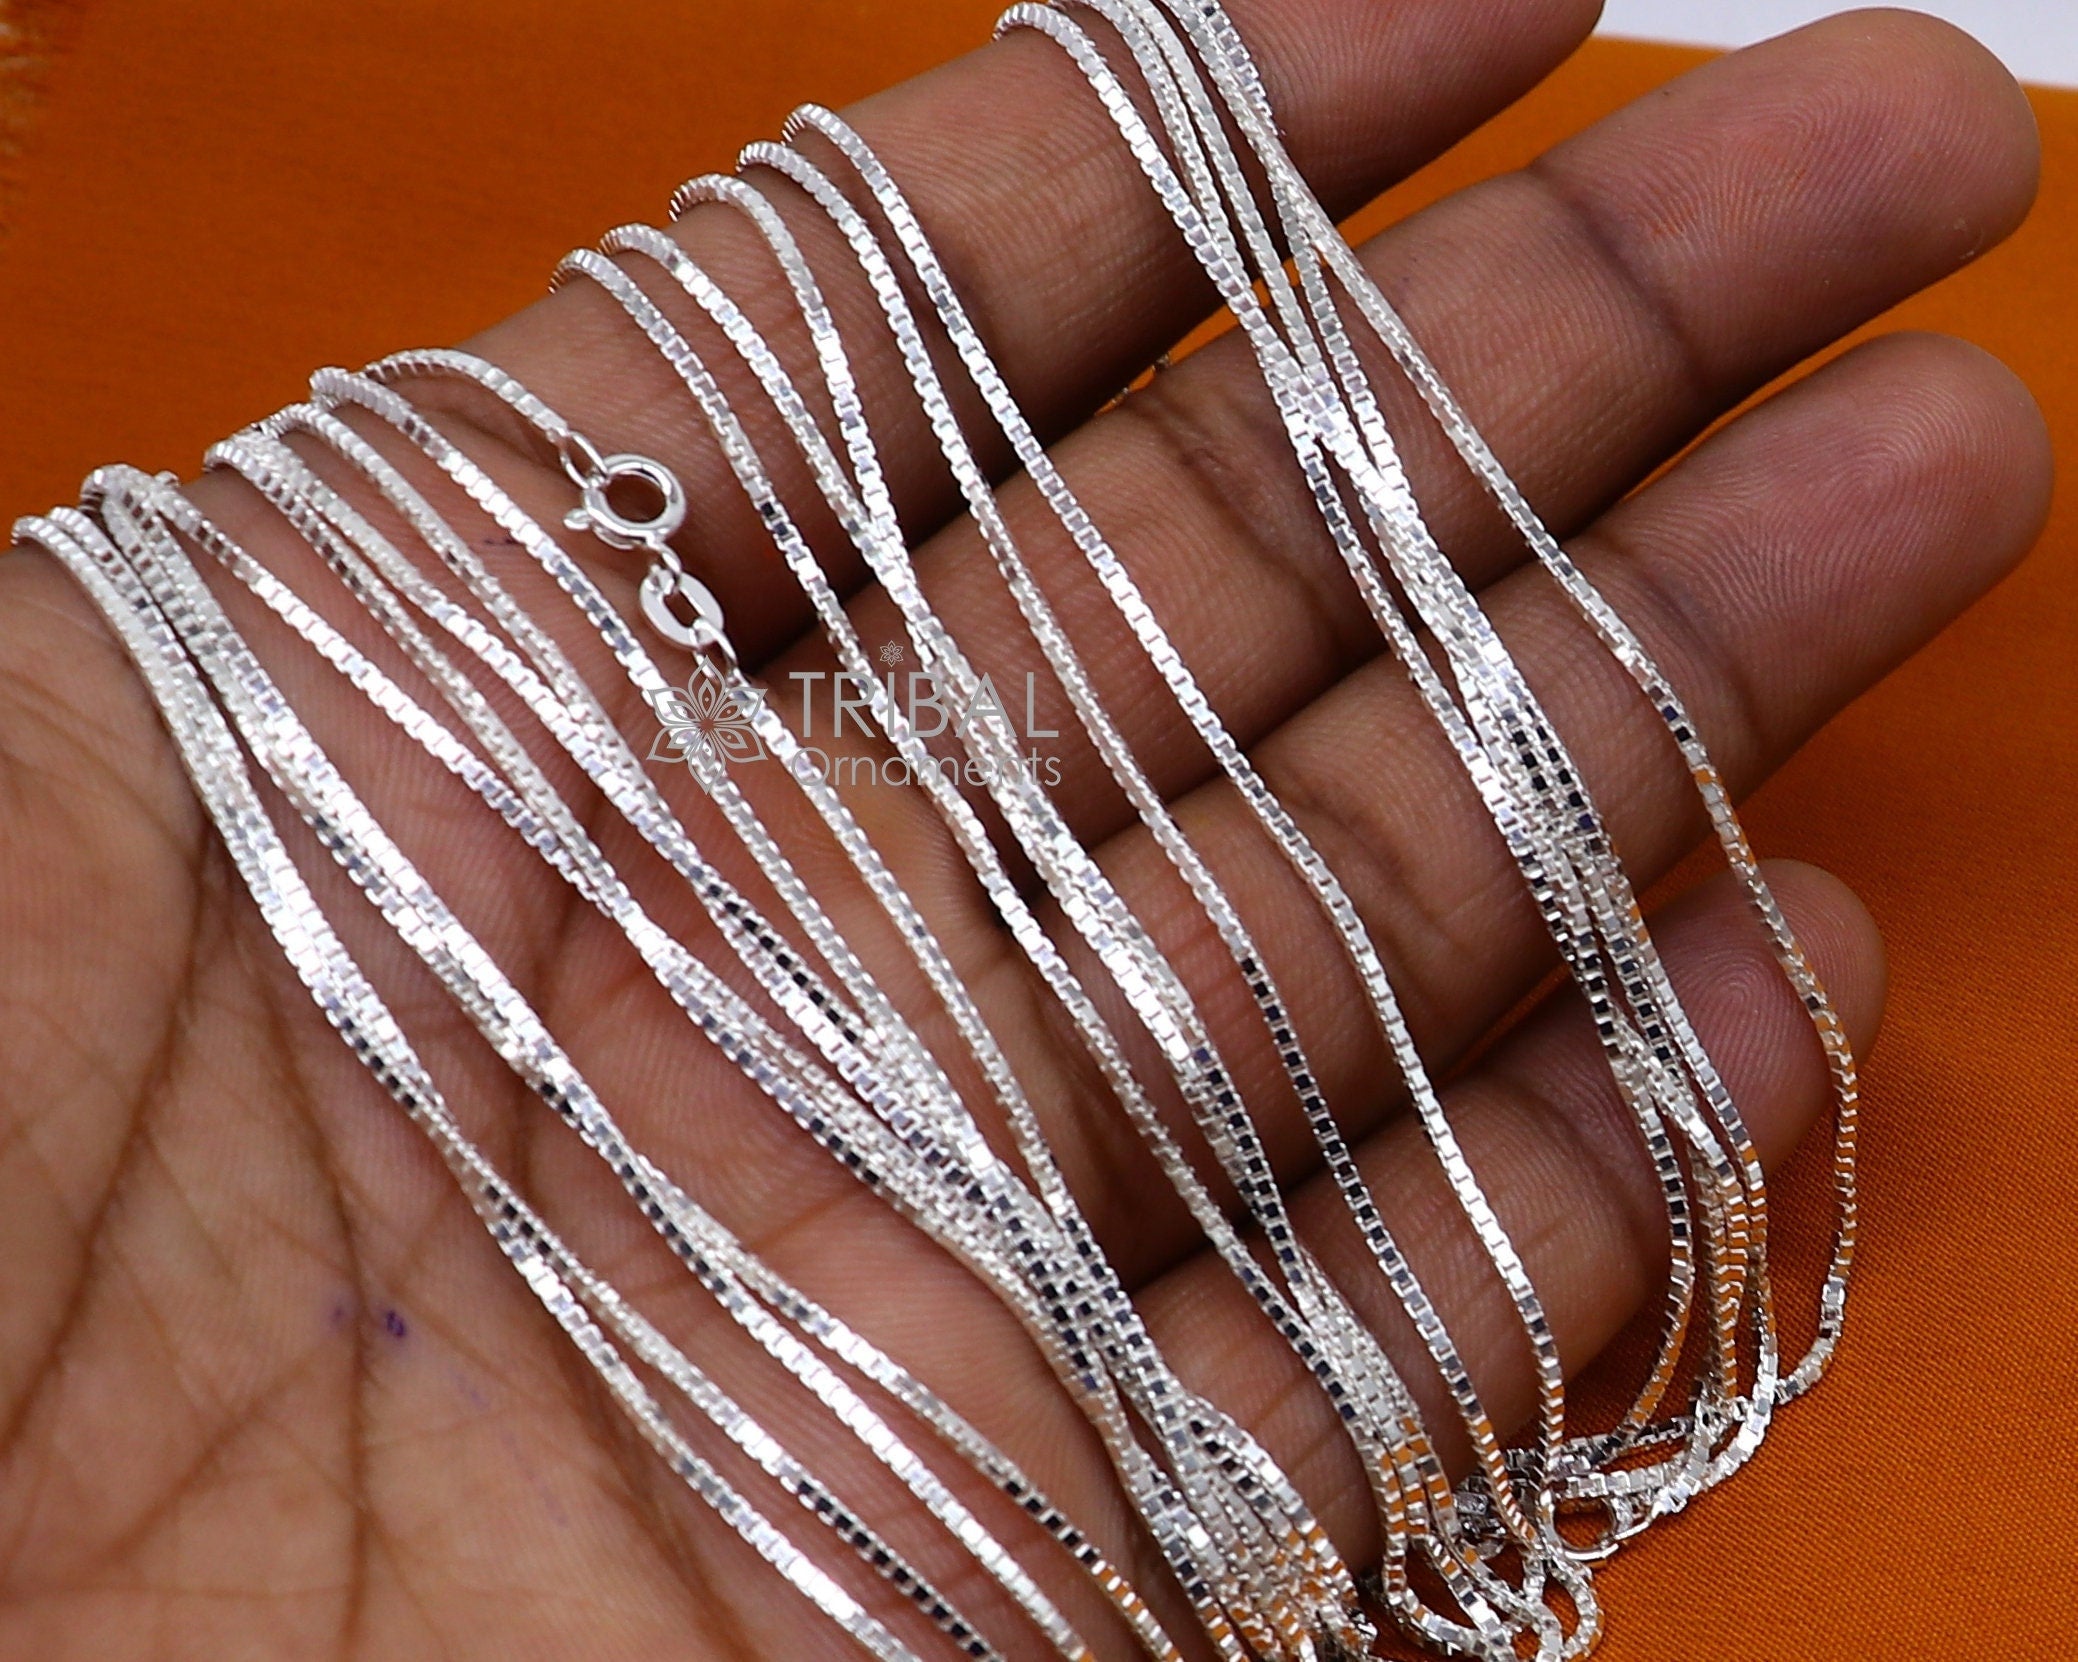 Cuban Mens' Chain Silver Bracelet Handmade Jewelry Gift — Discovered